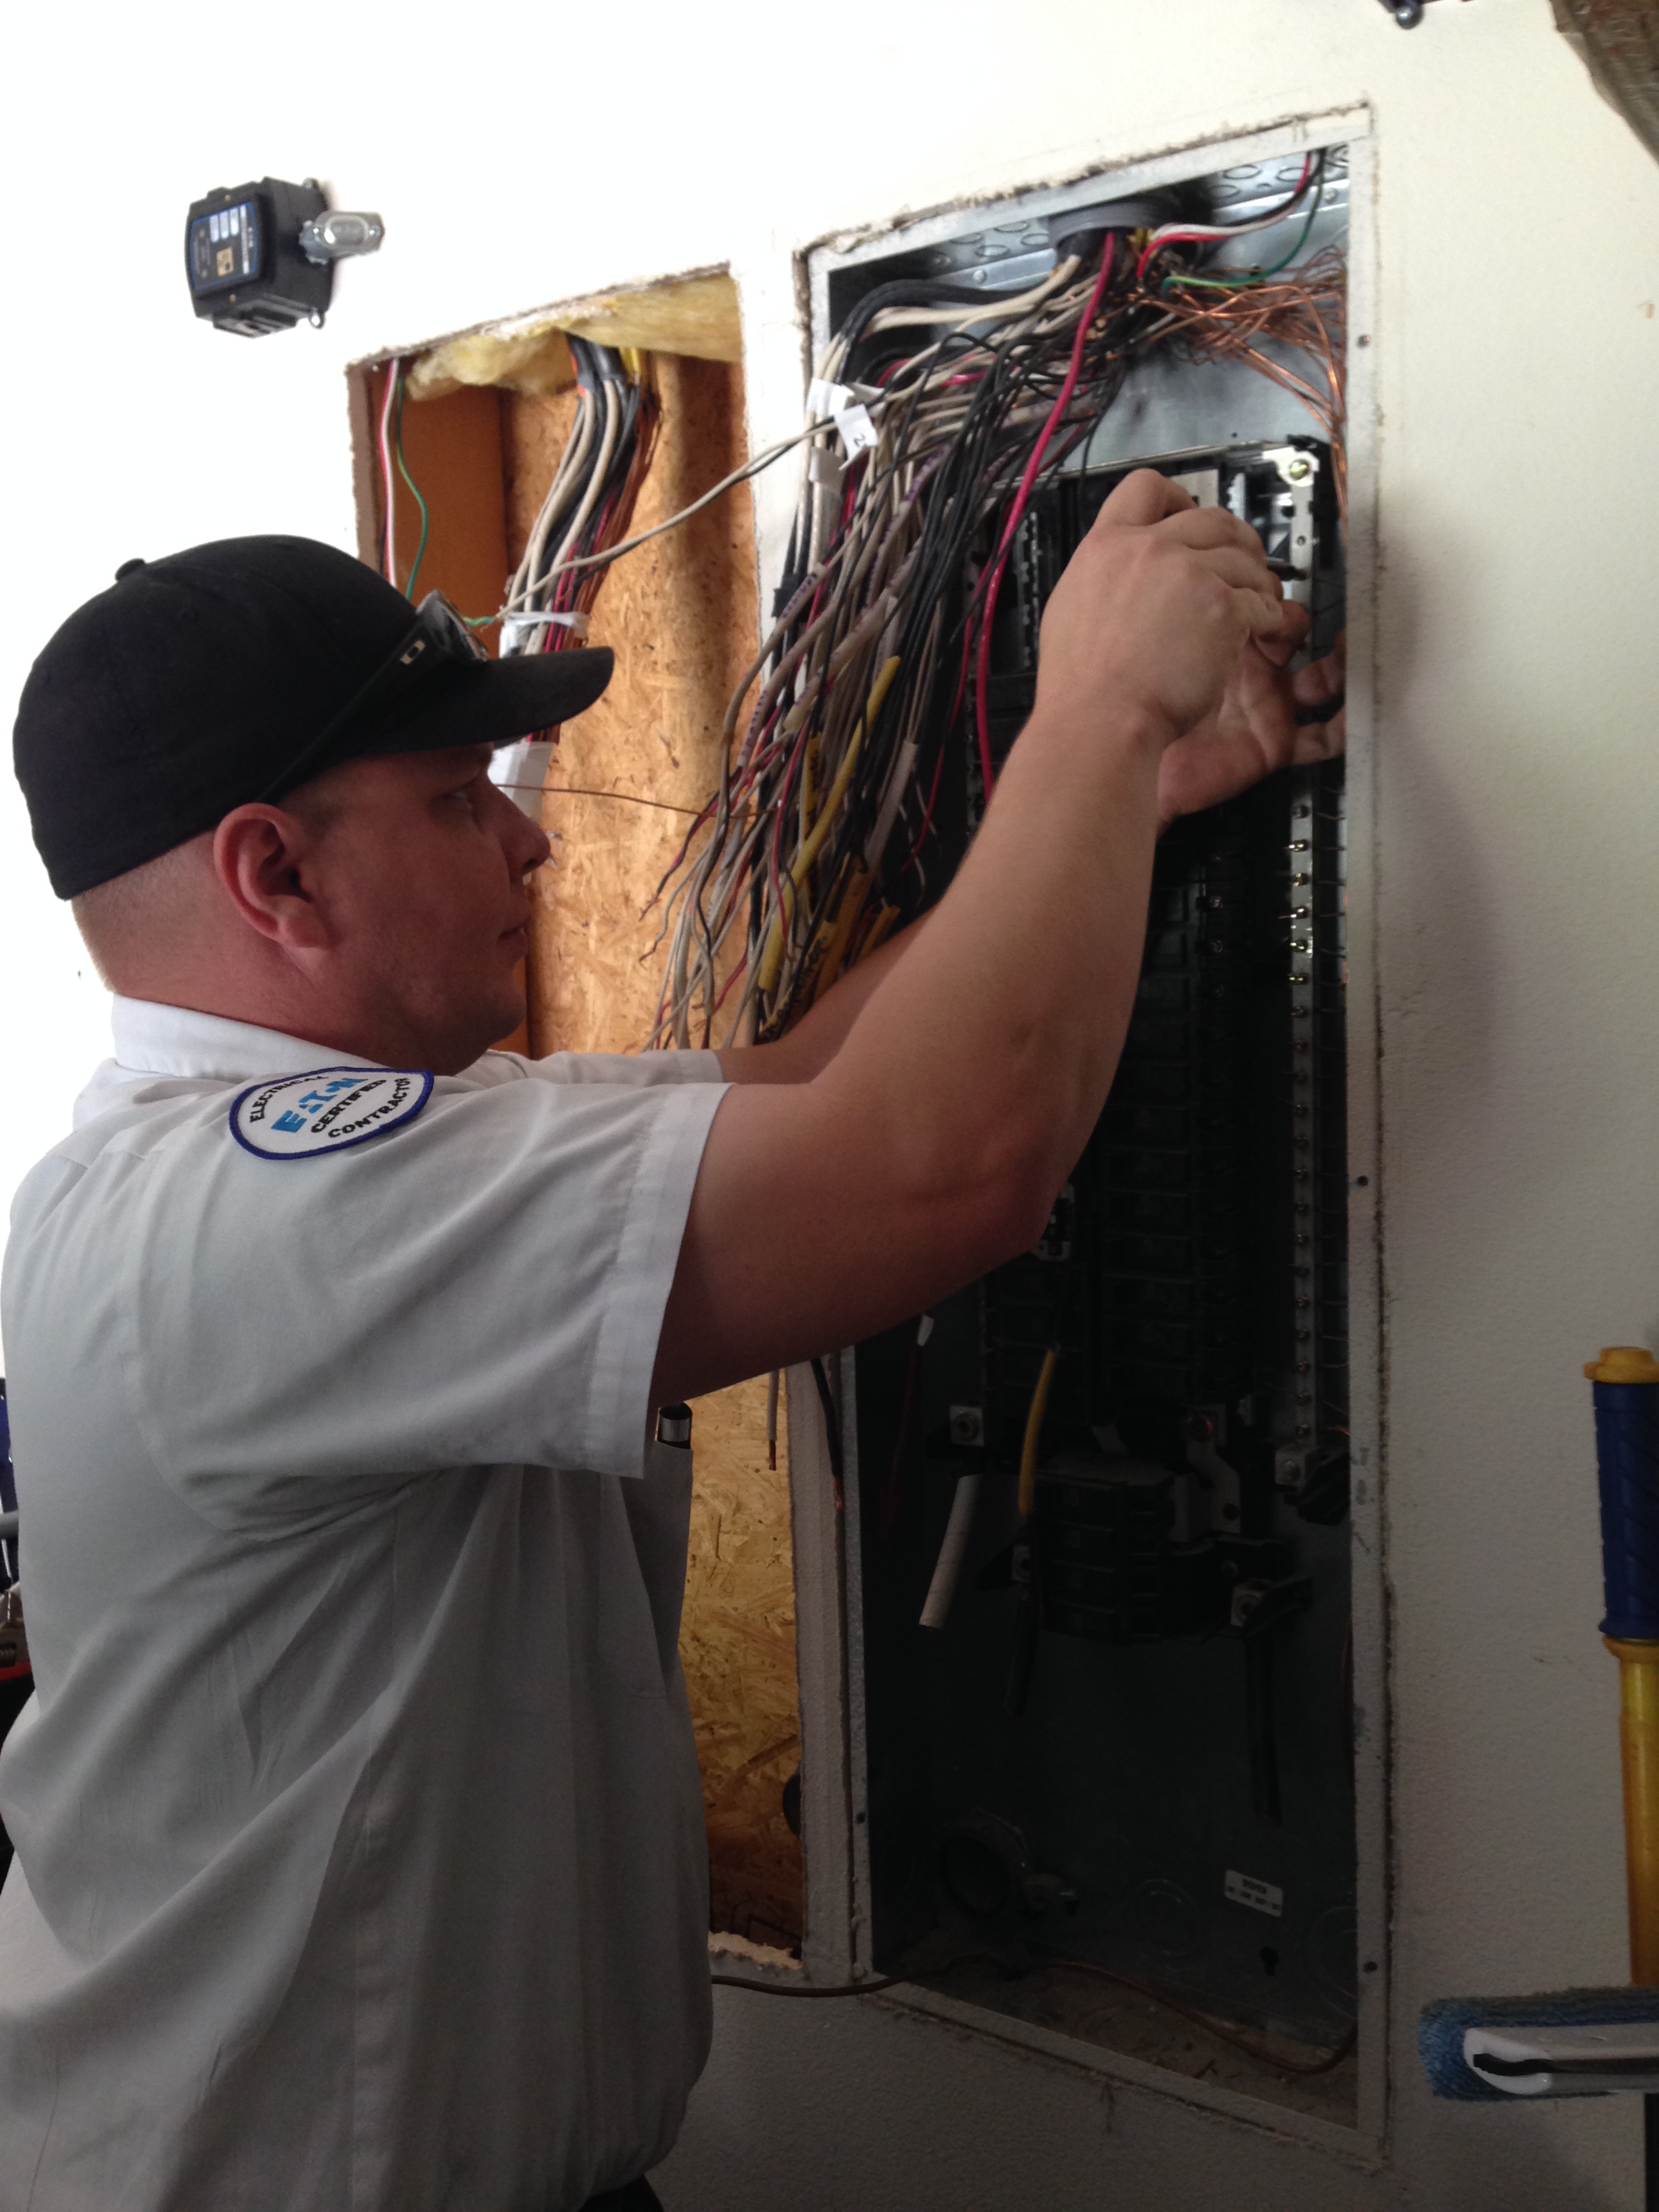 TLC Electrical Expert Electrician – He knows where all the wires go.